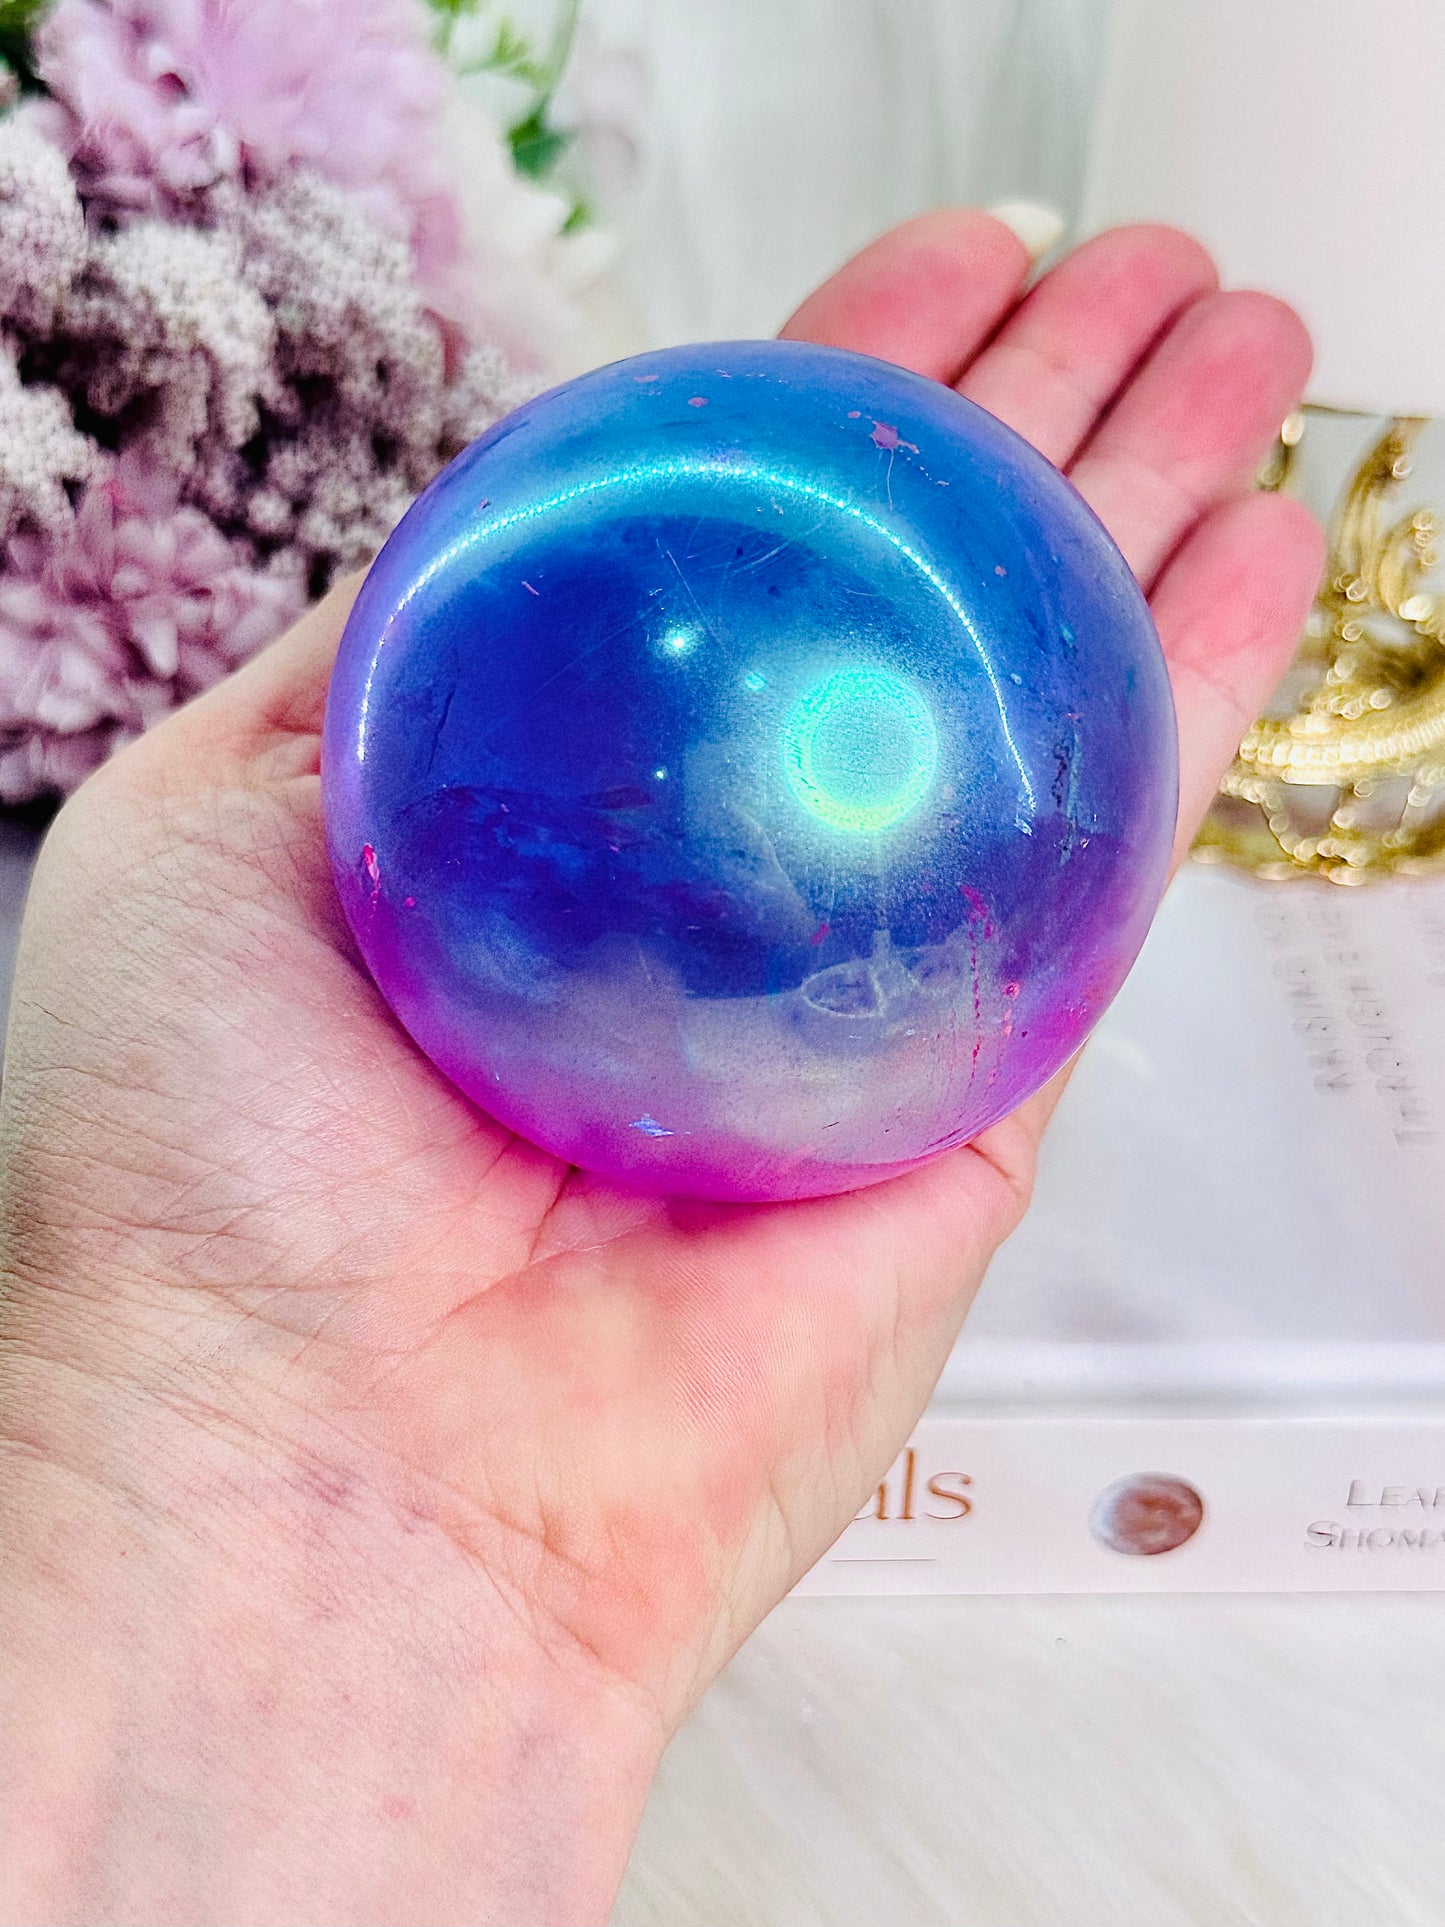 Stunning Large 449gram Aura Clear Quartz Sphere on Stand So Pretty (glass stand in pic is display only)